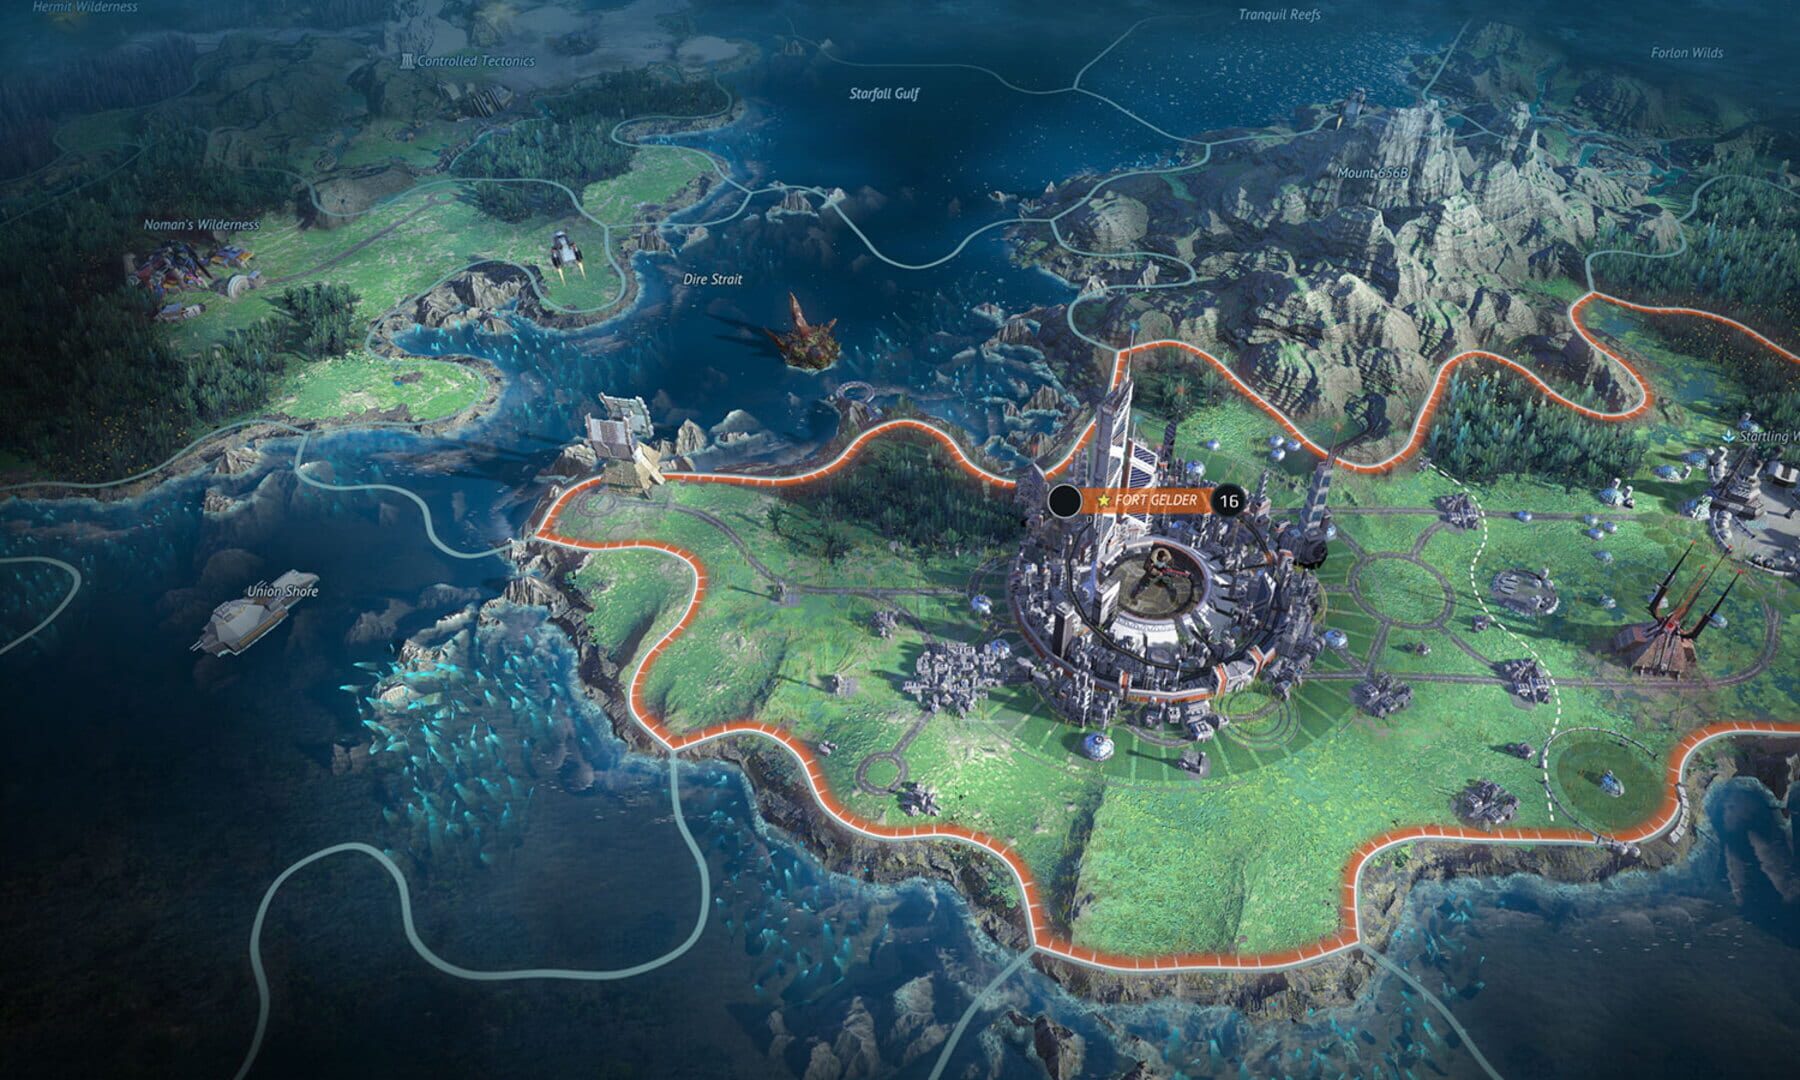 age of wonders planetfall online multiplayer could not login